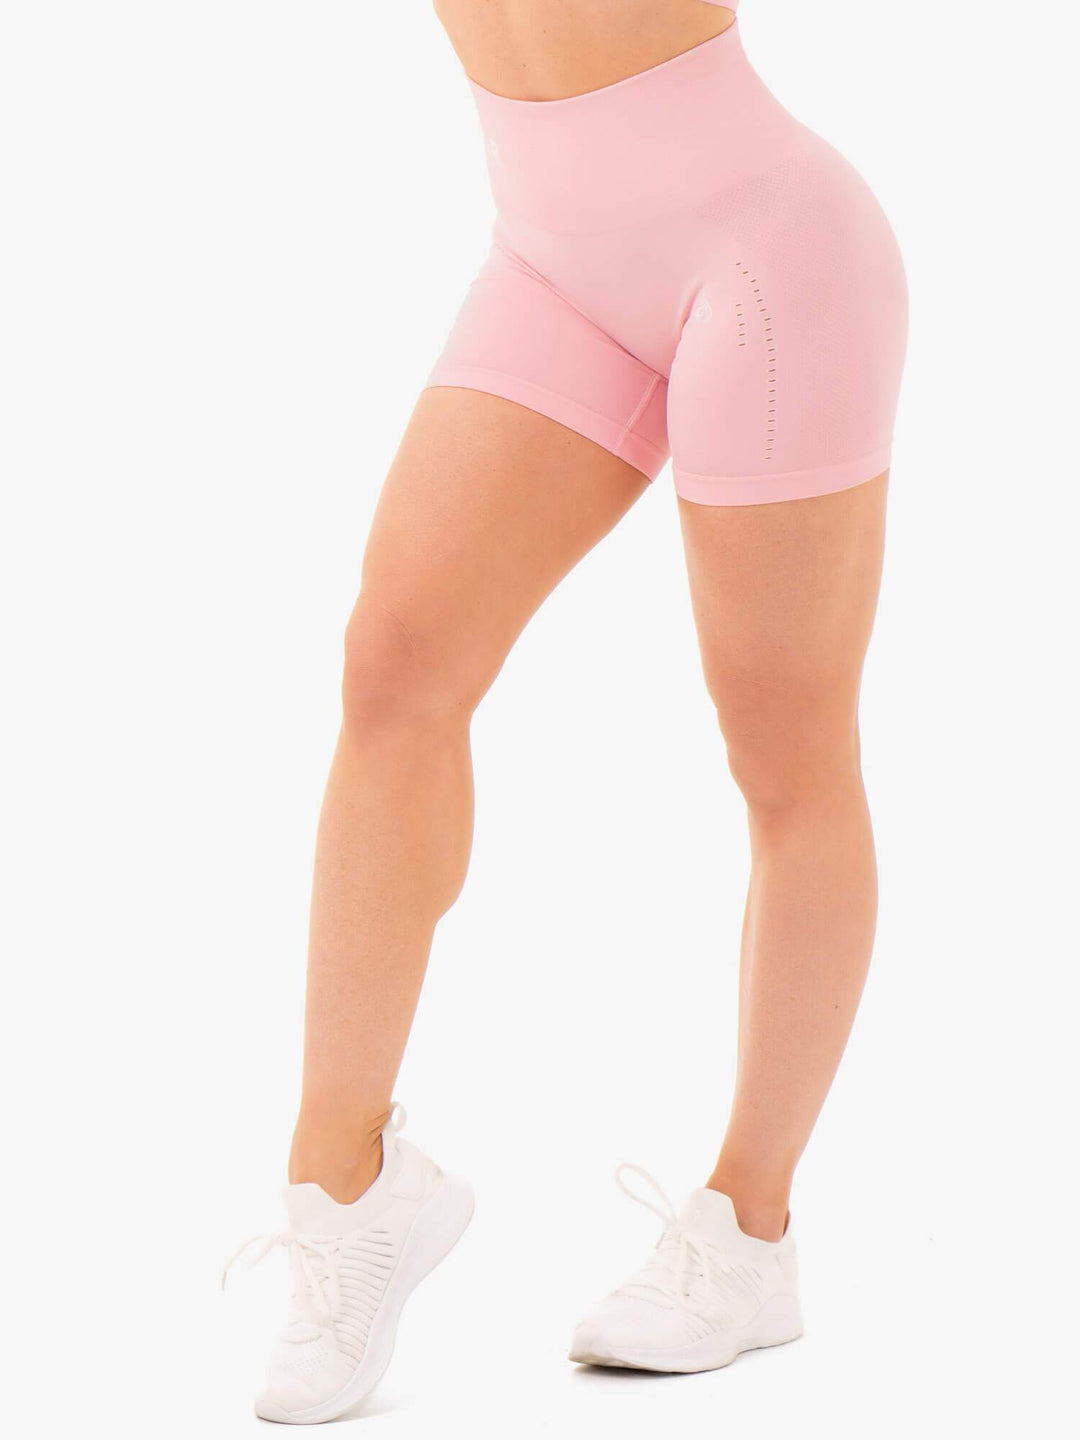 Seamless Staples Shorts - Baby Pink Marl Clothing Ryderwear 